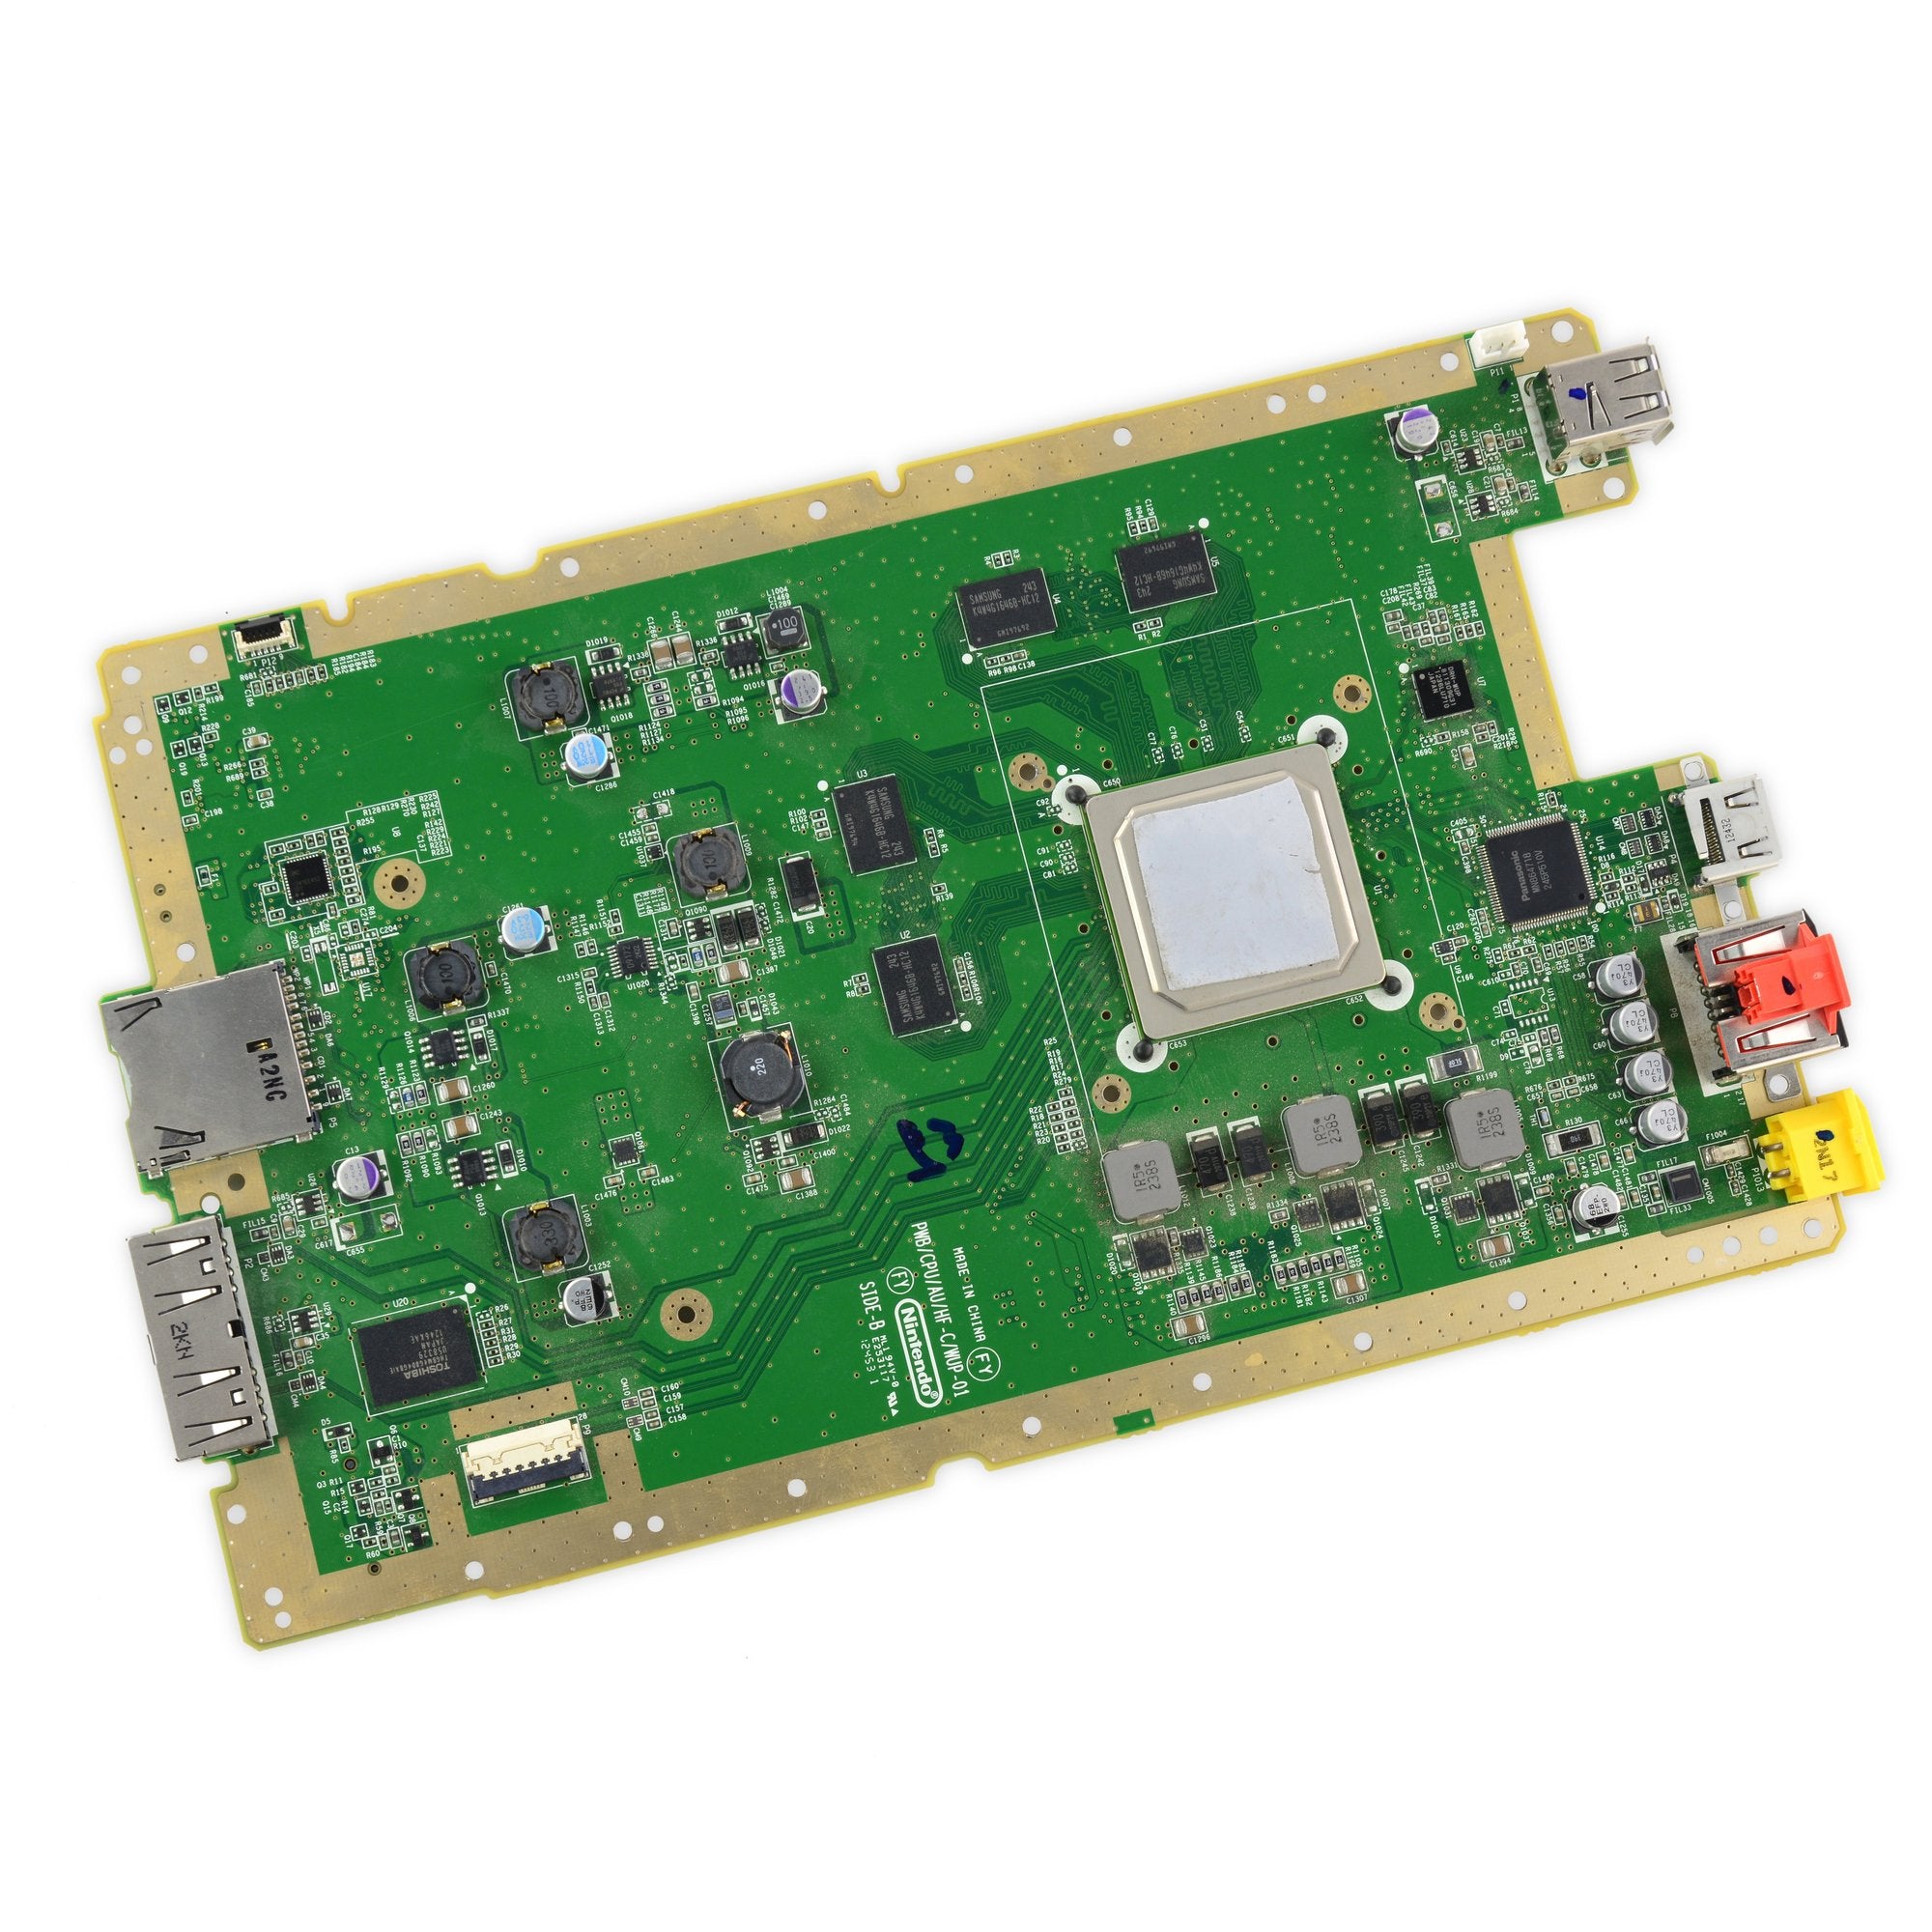 Nintendo Wii U Motherboard & Paired Optical Drive